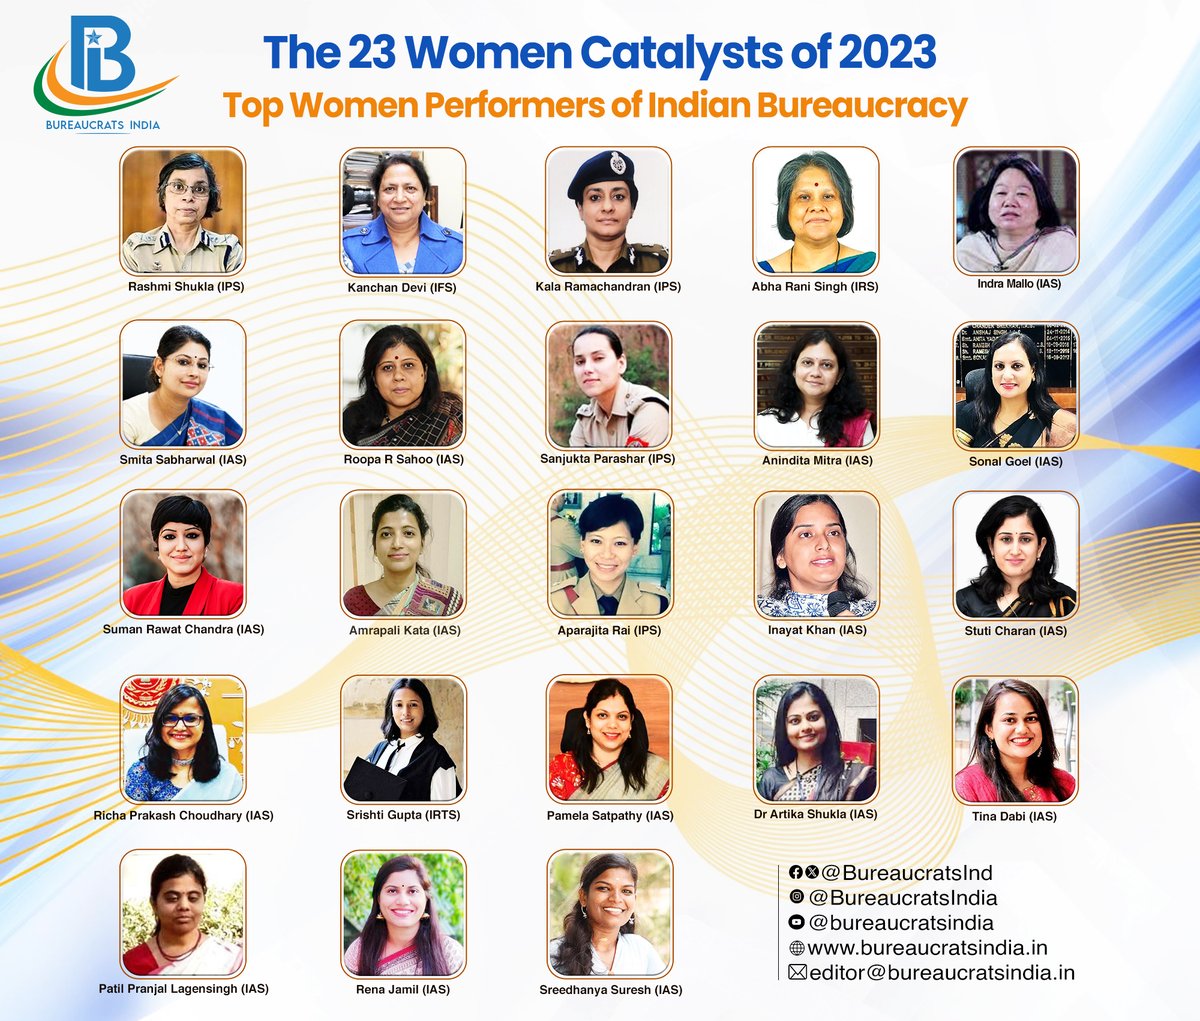 Mrs. Kanchan Devi, IFS, Director General, ICFRE has been honored as one of The 23 Women Catalysts of 2023: Top Women Performers in Indian Bureacracy by Bureaucrats India.